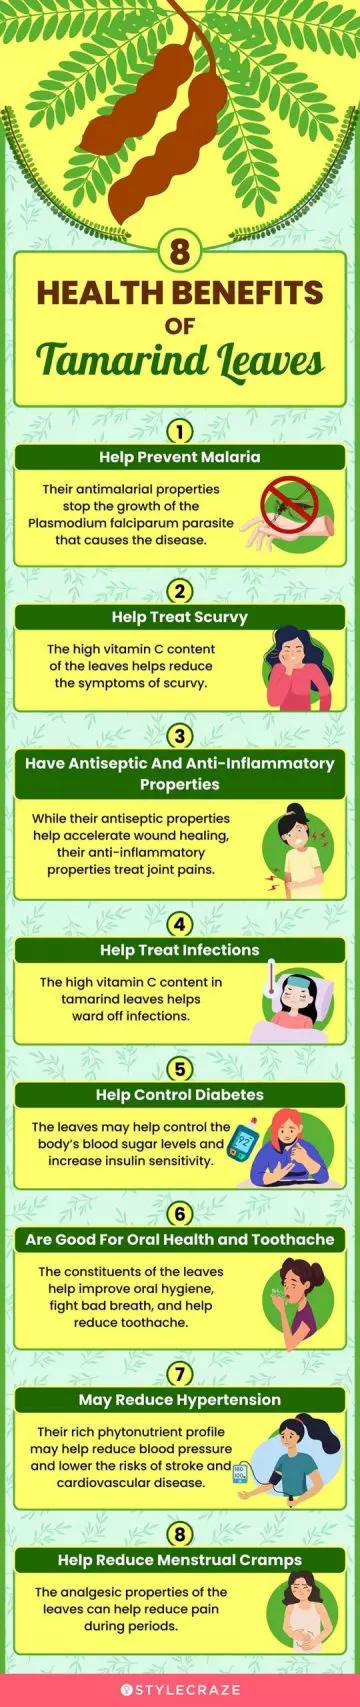 8 health benefits of tamarind leaves (infographic)